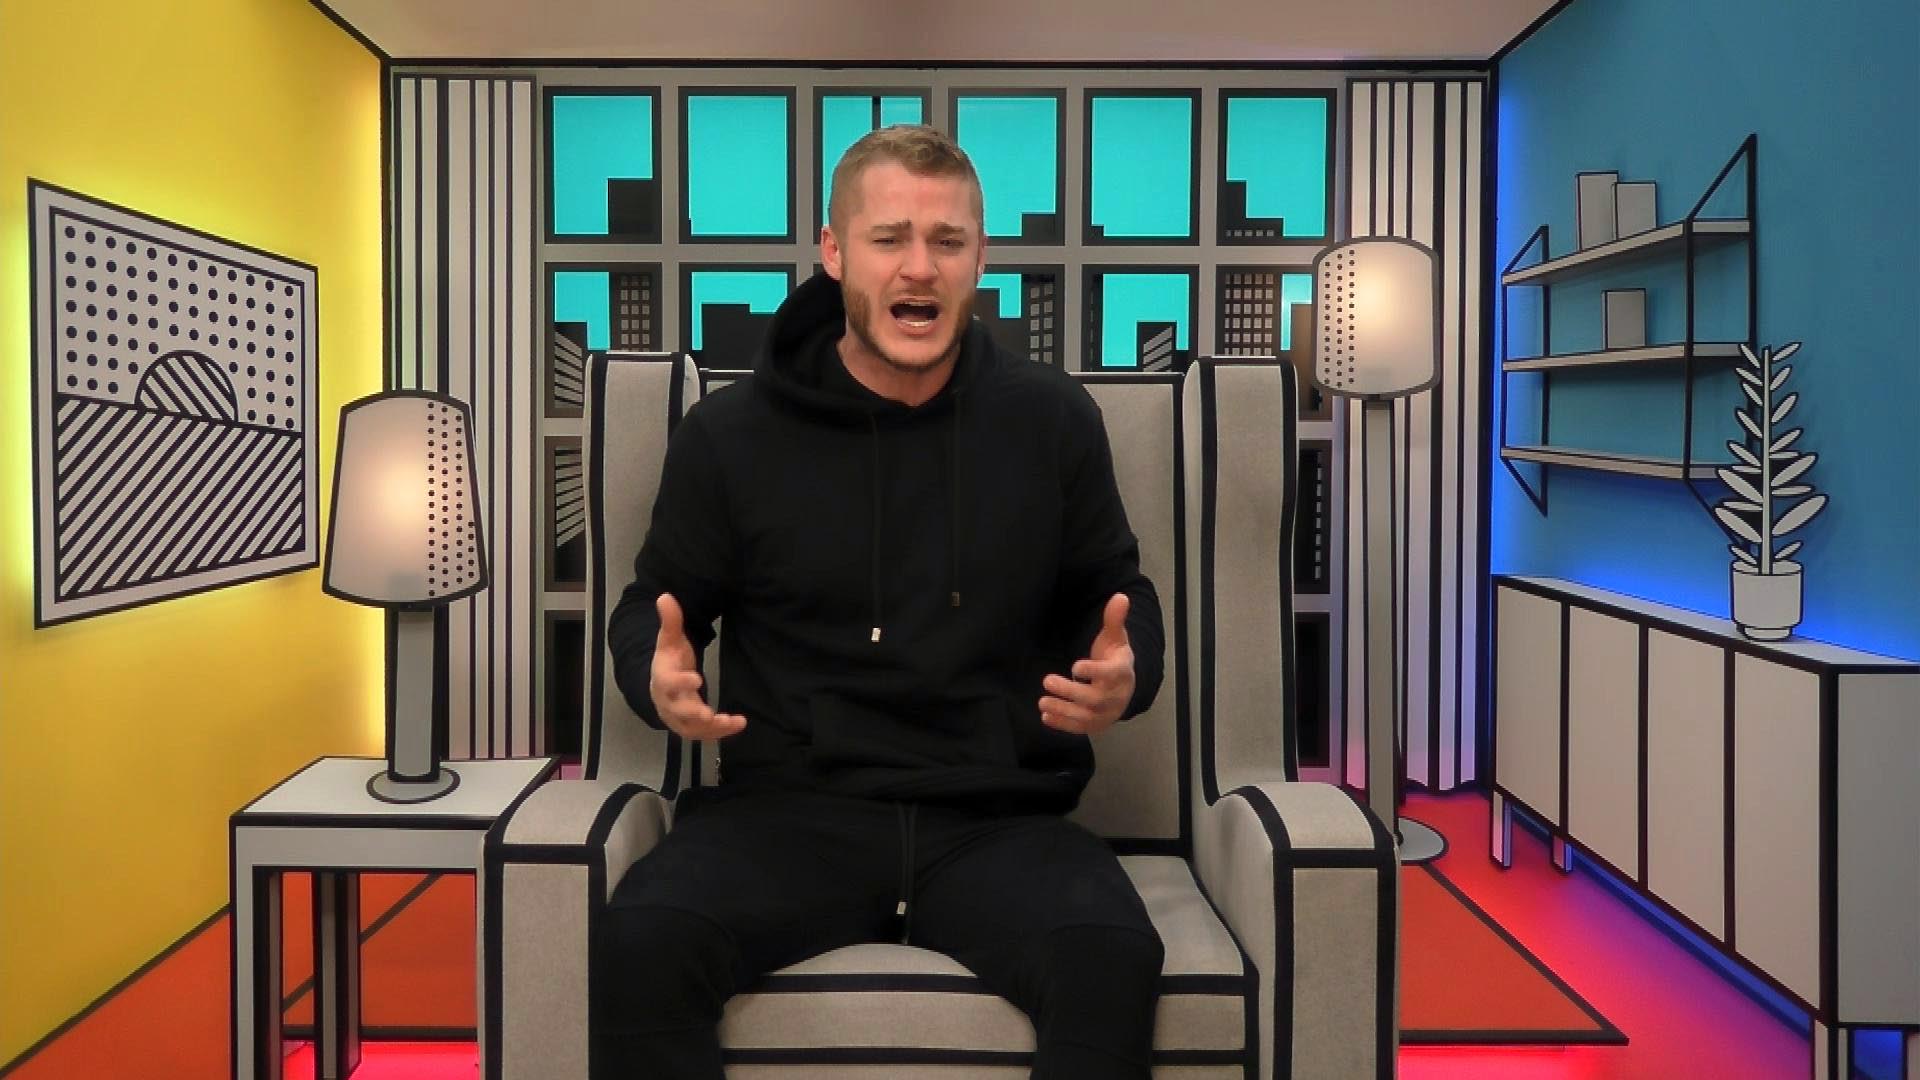 Day 8: Austin on being in CBB: “What the f**k am I doing here?”